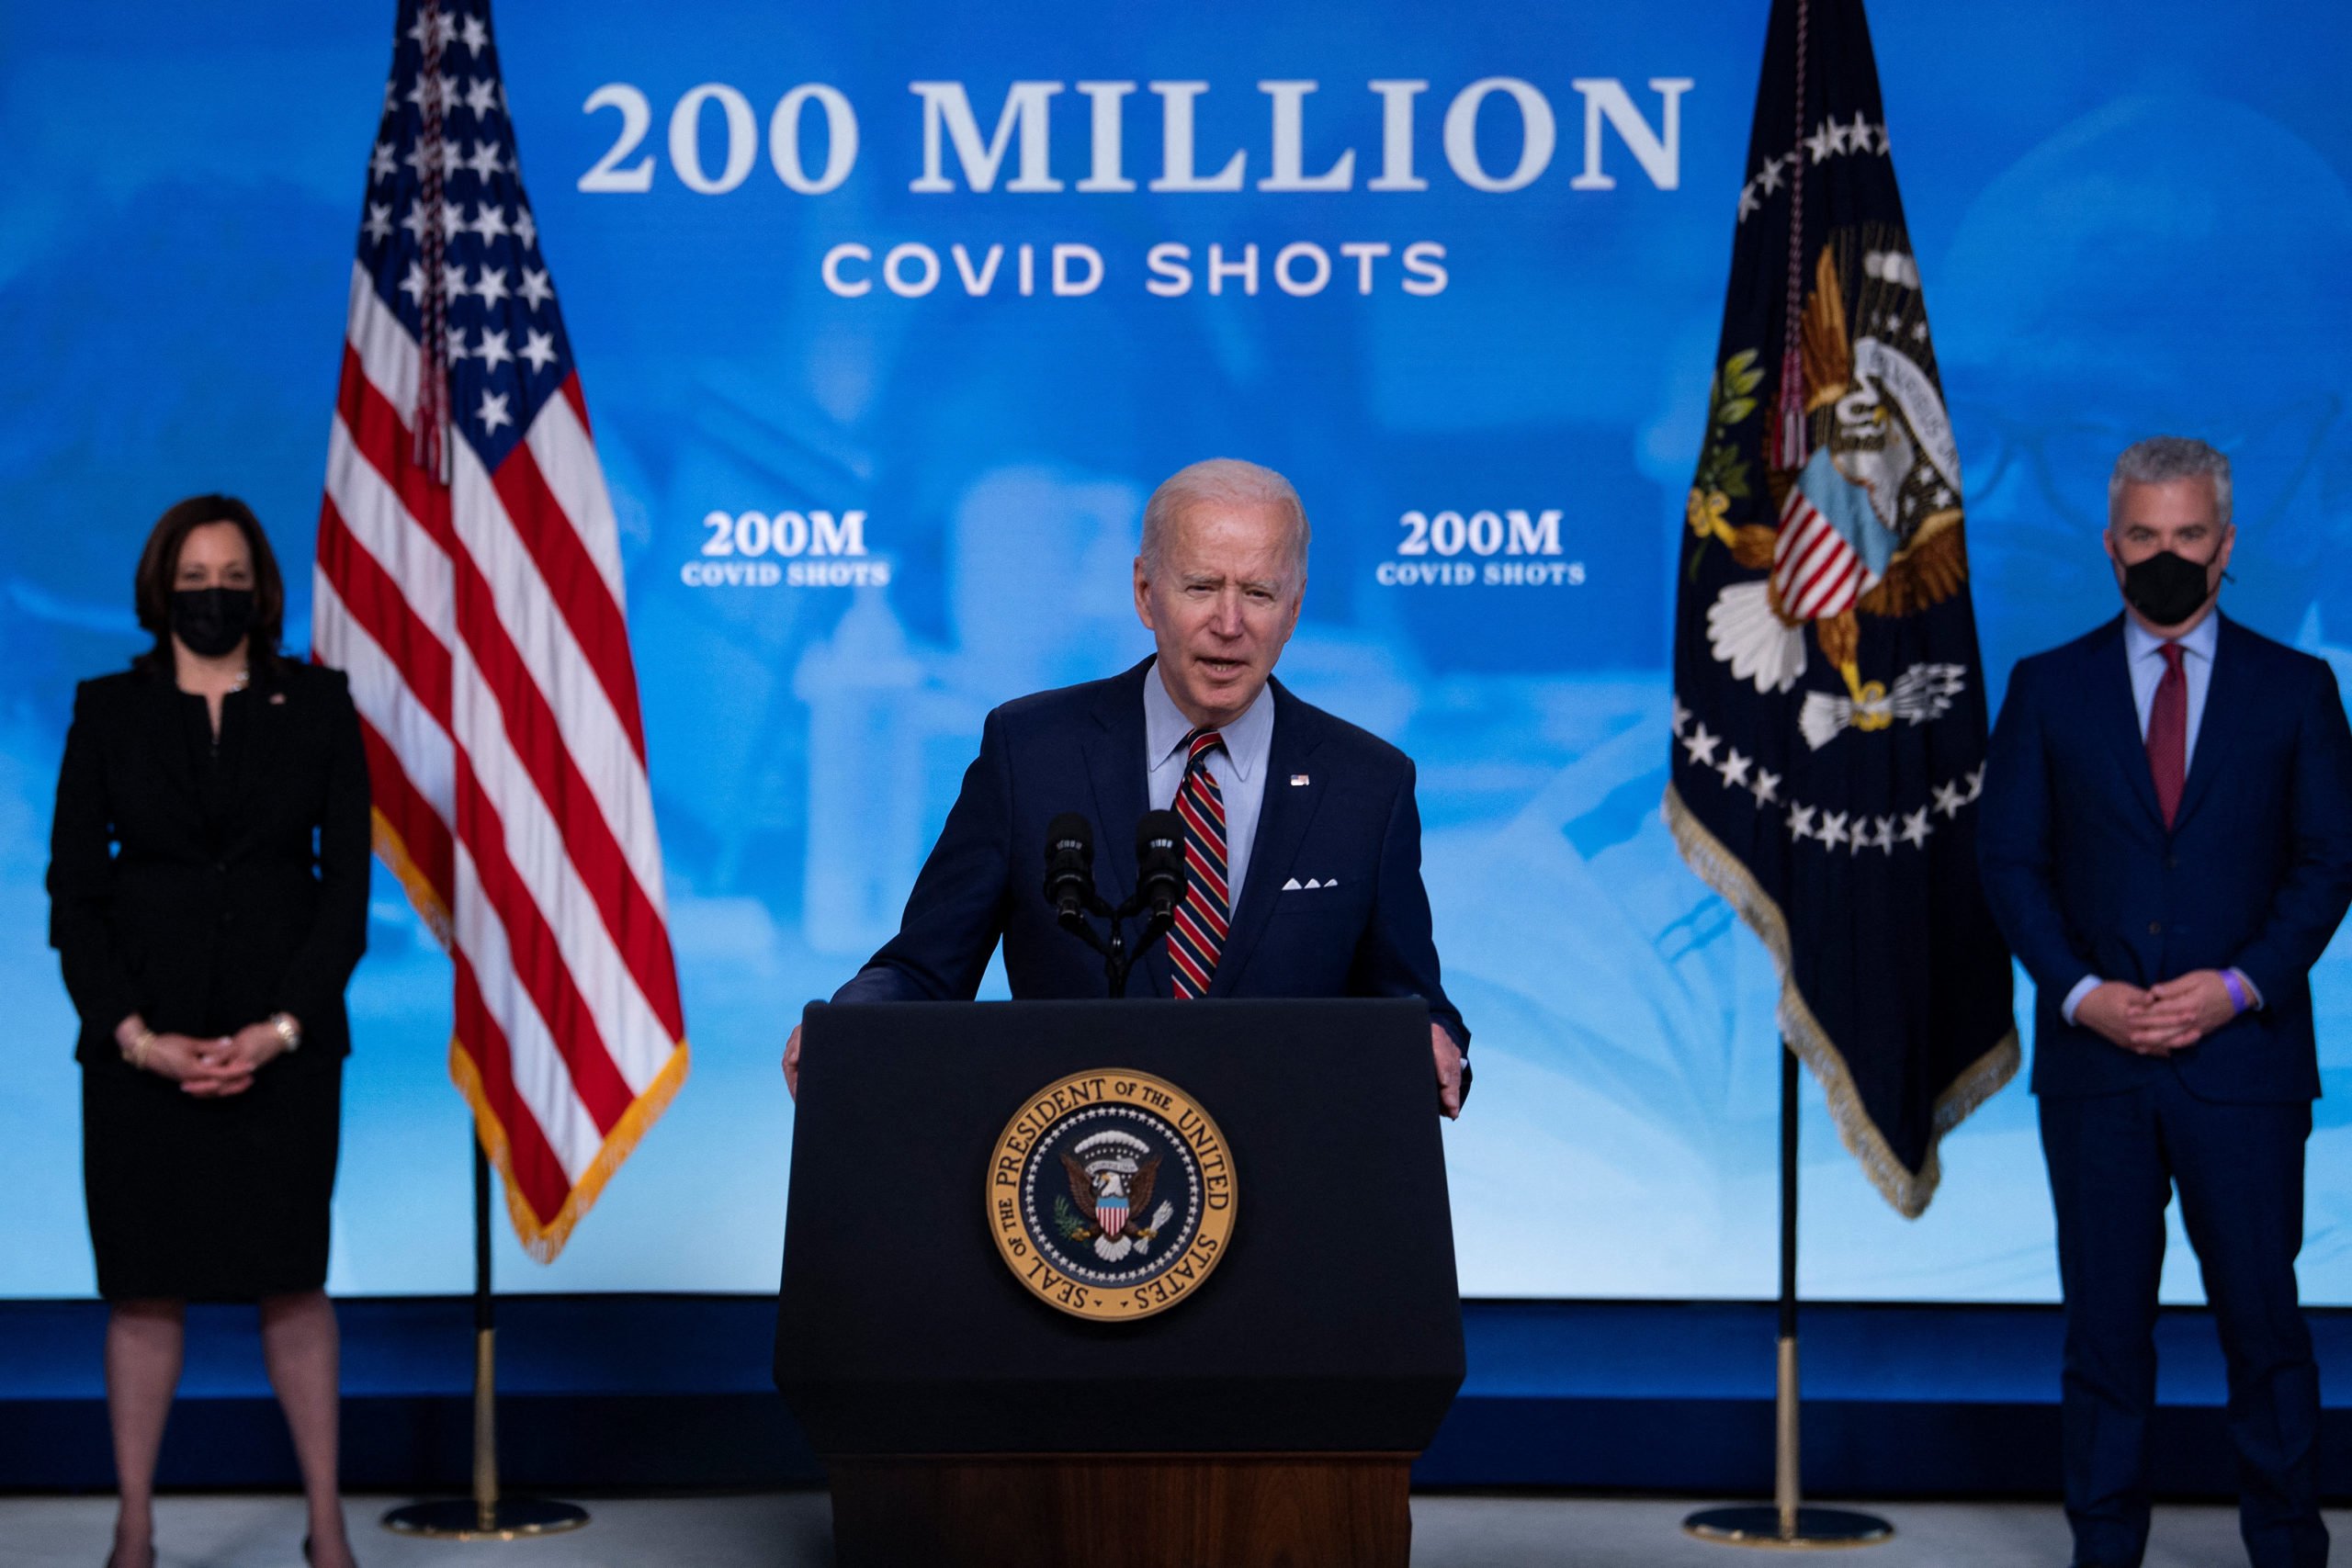 President Joe Biden speaks about the ongoing U.S. coronavirus response and the state of vaccinations on Wednesday. (Brendan Smialowski/AFP via Getty Images)